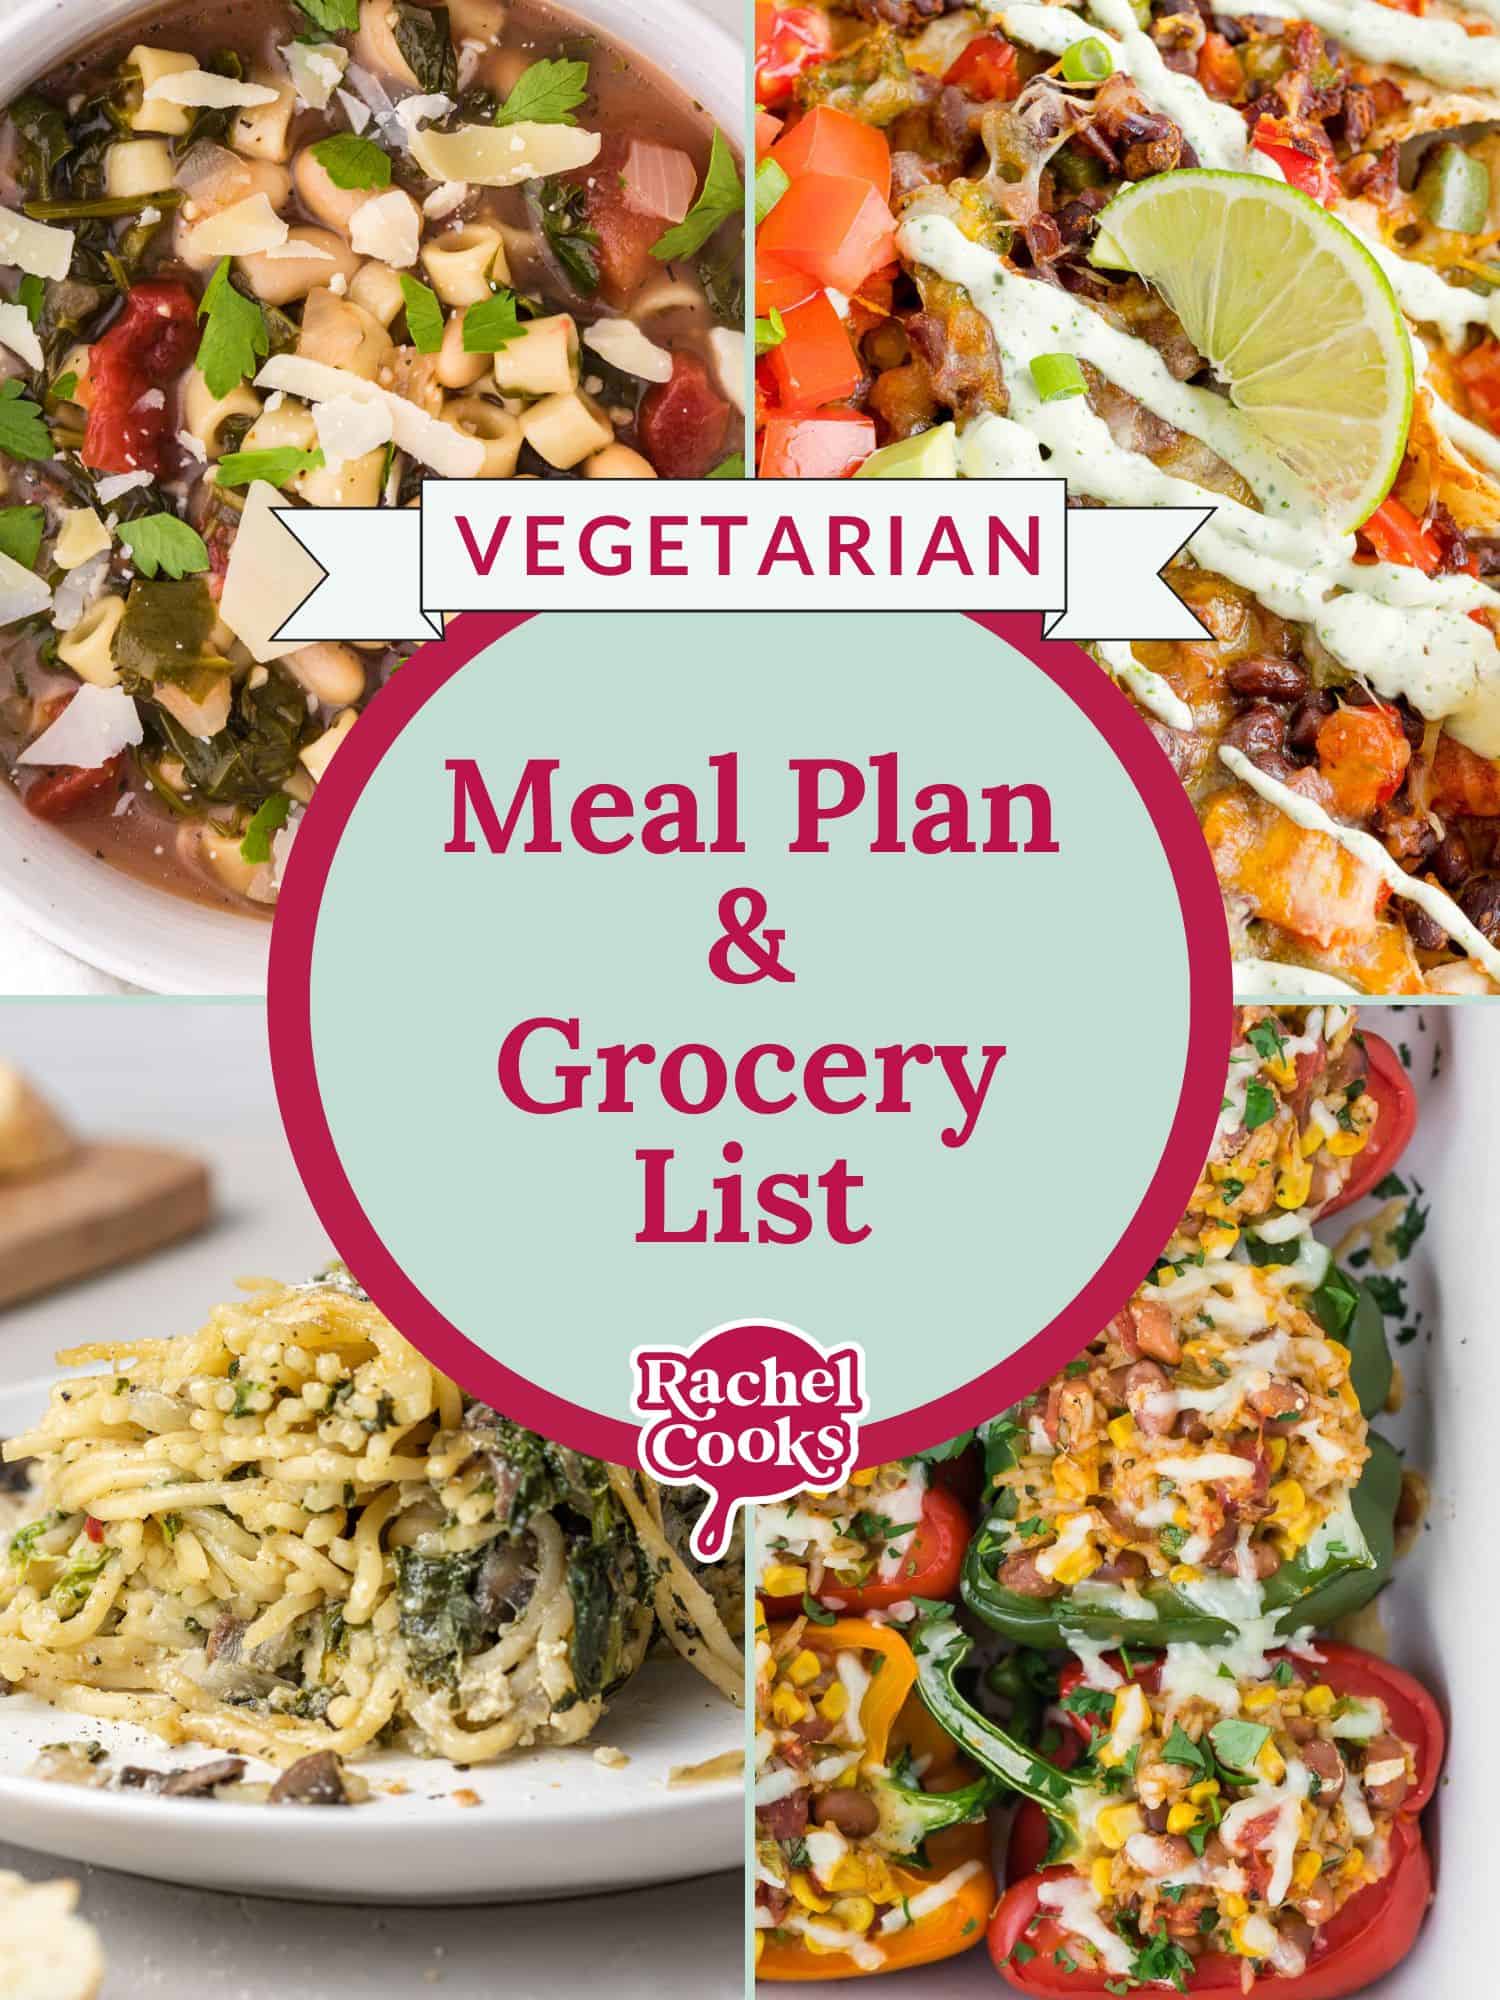 Vegetarian meal plan graphic with text and photos, reading meal plan and grocery list.